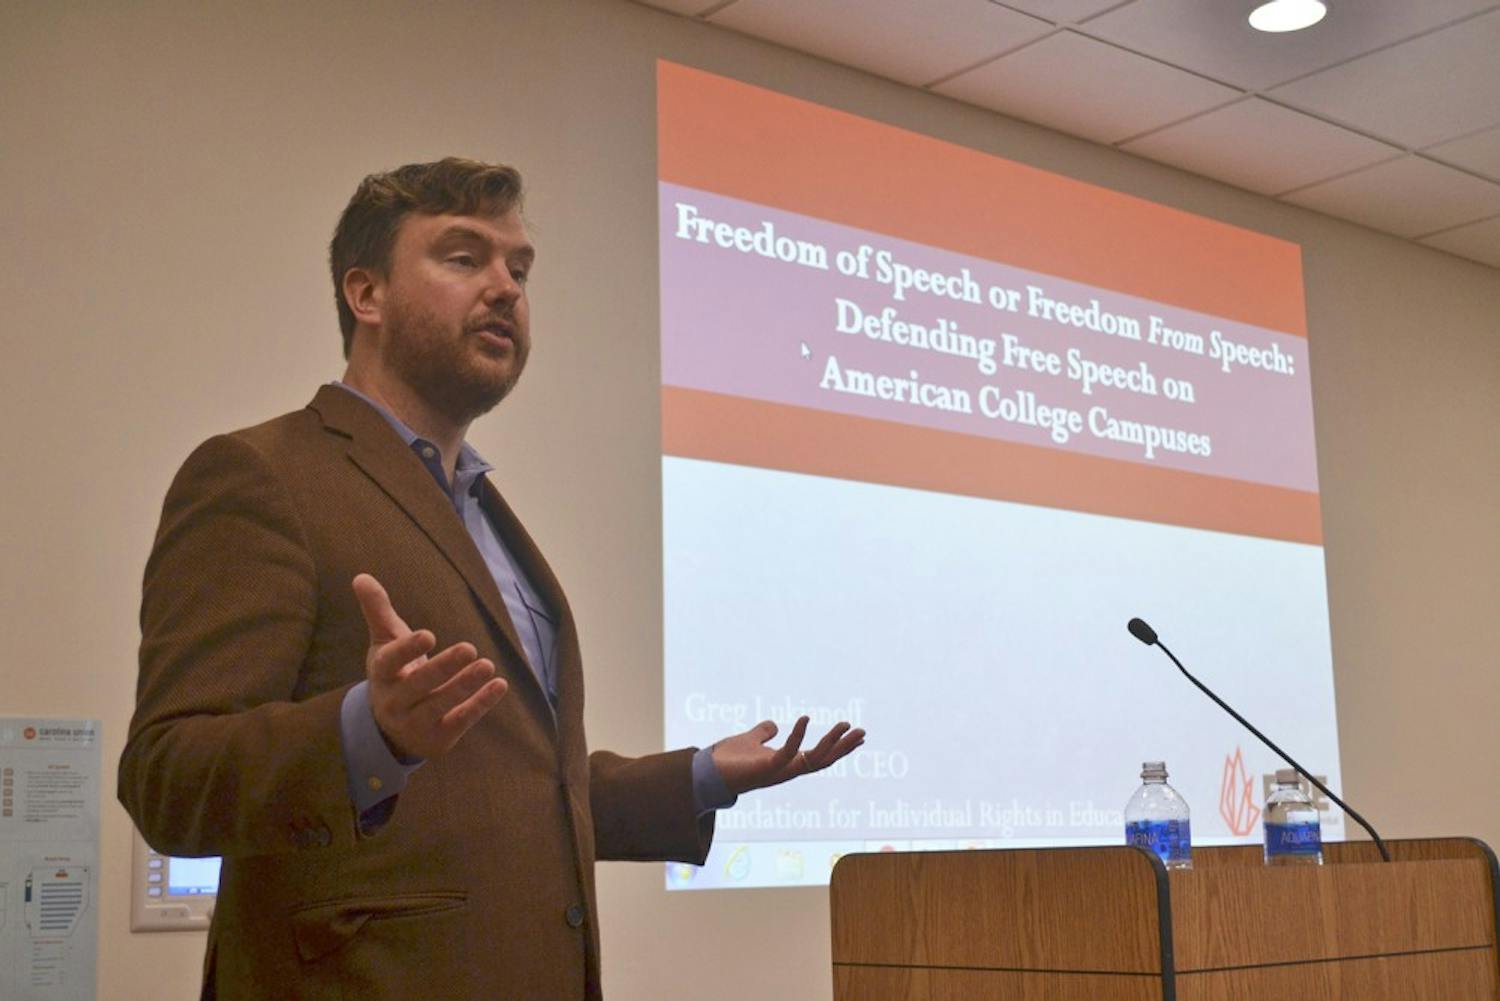 Greg Lukianoff, the president of the Foundation for Individual Rights in Education (FIRE), holds a talk discussing the lack of free speech permitted on American college campuses.